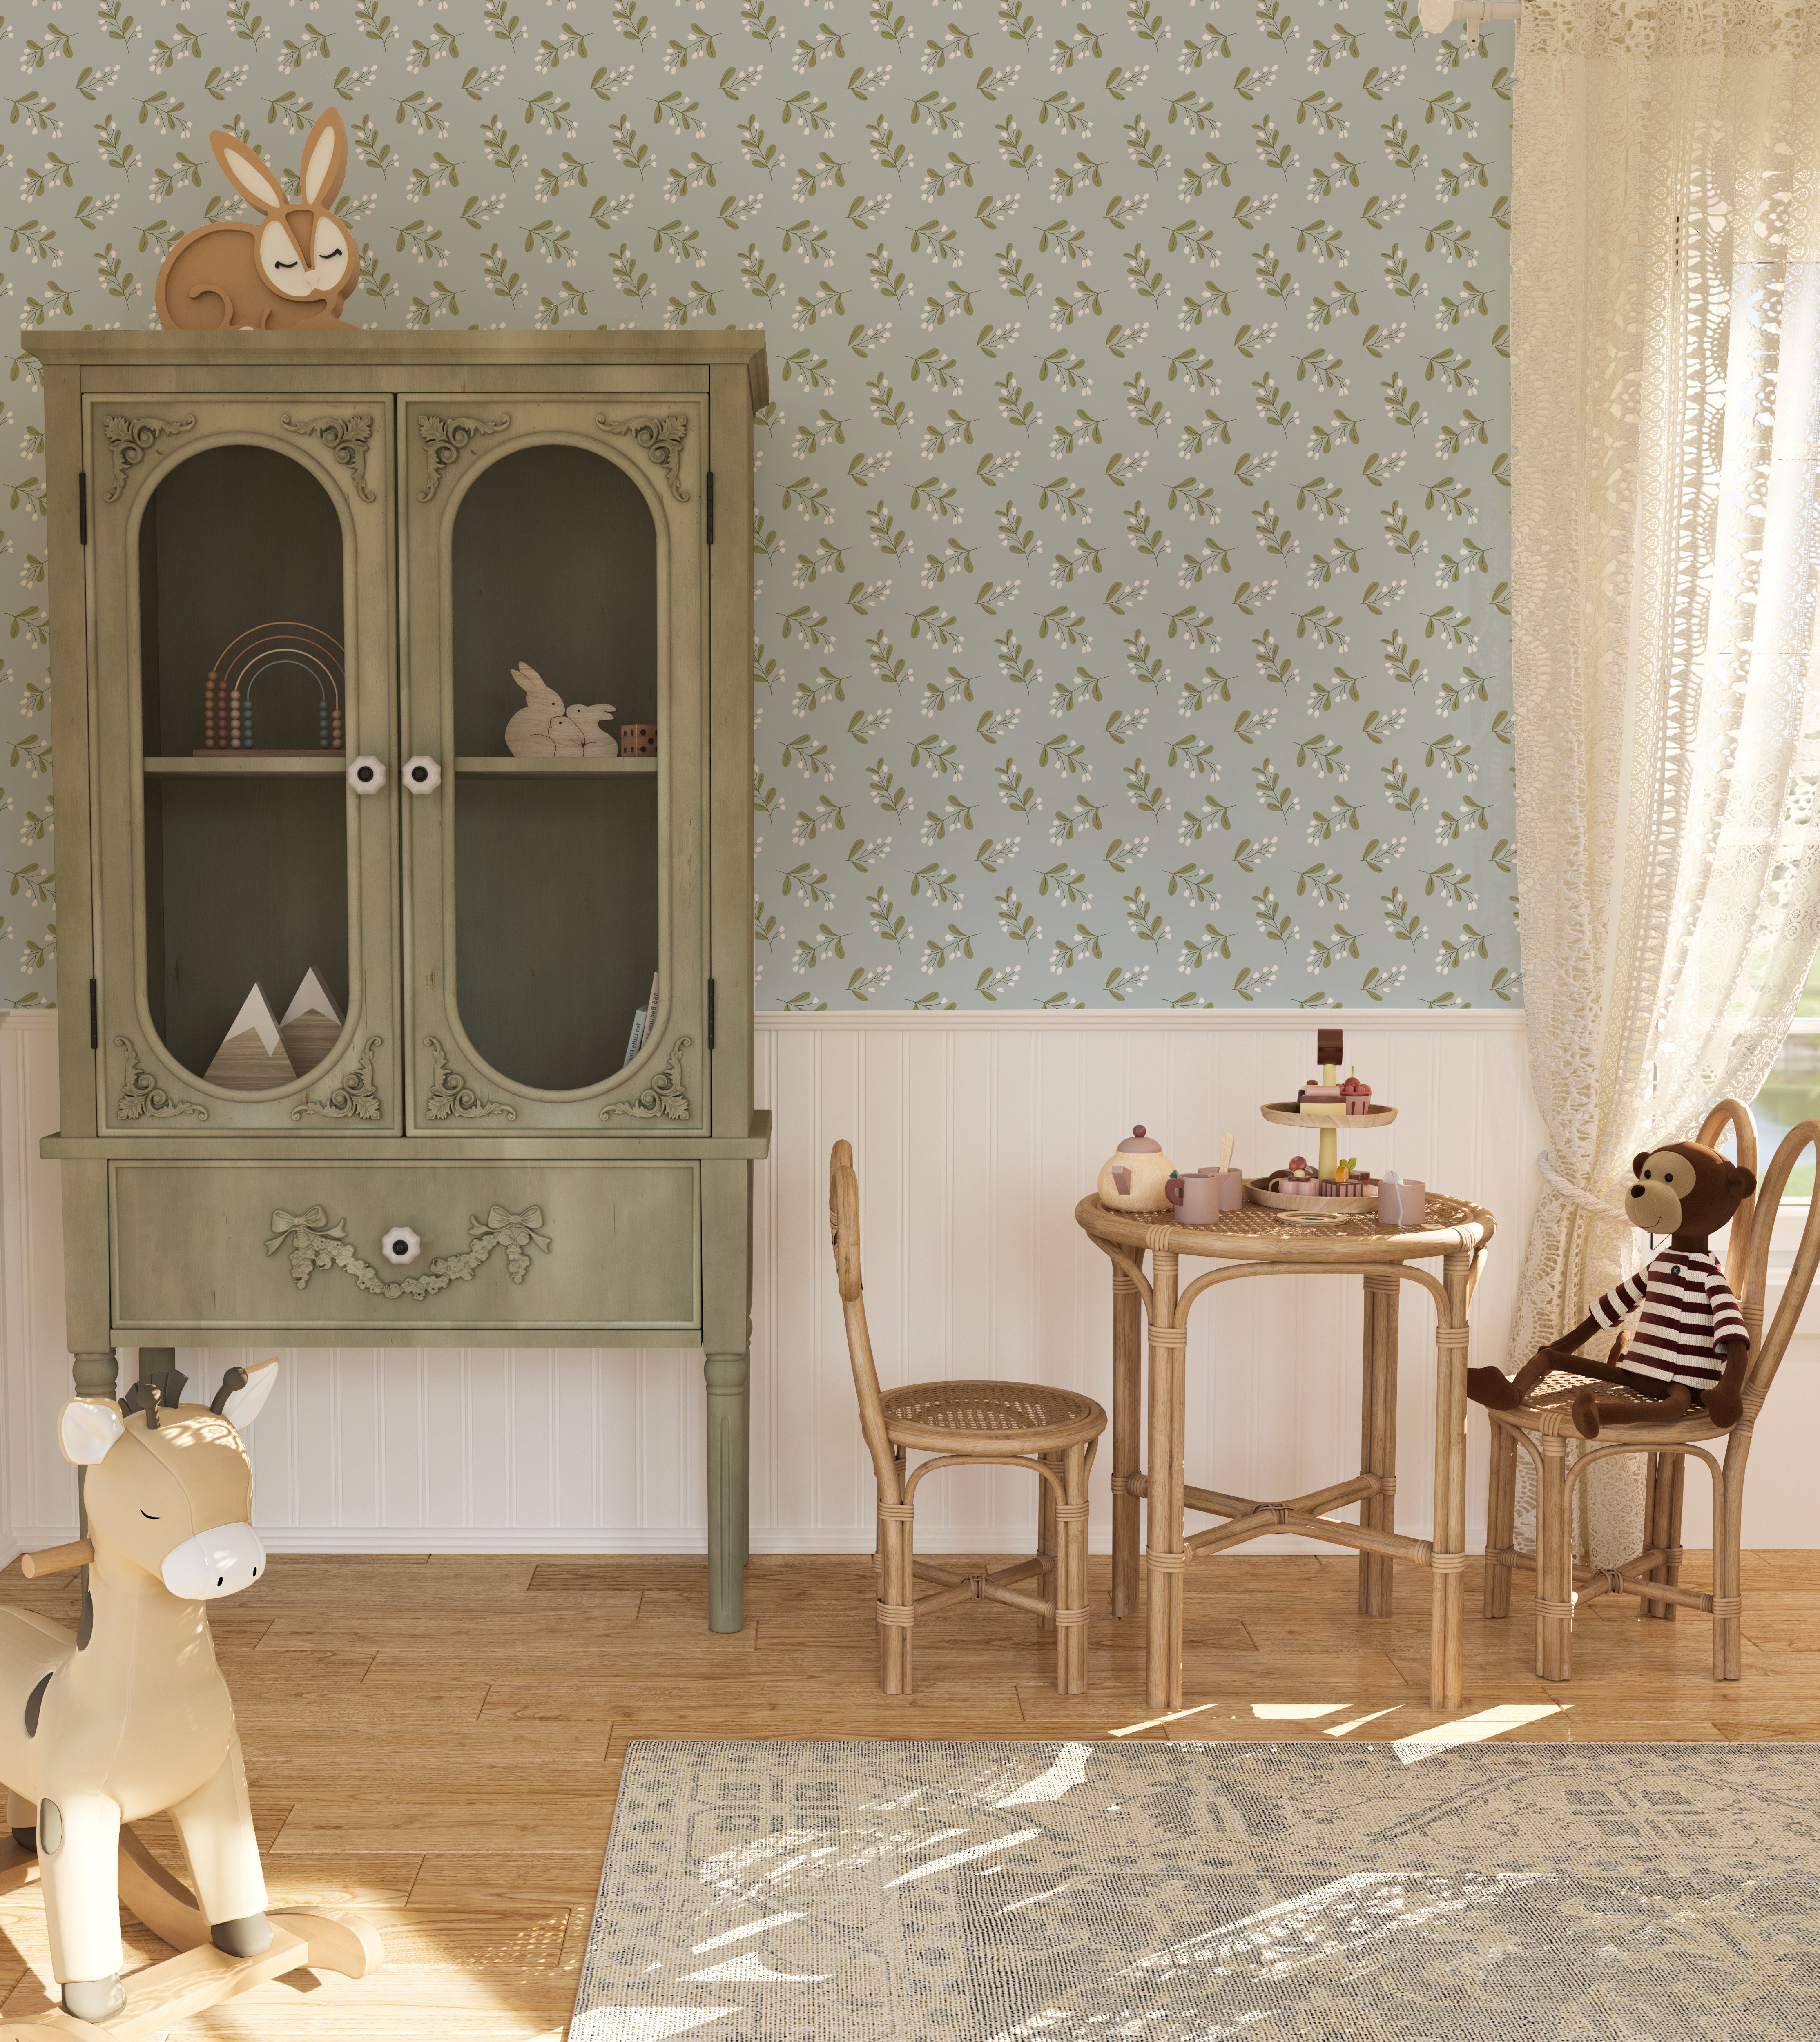 Interior view of a children's playroom with Simple Floral Wallpaper - 12.5" on the feature wall. The wallpaper features a delicate pattern of small white flowers and green leaves on a soft blue background, creating a whimsical and inviting atmosphere.